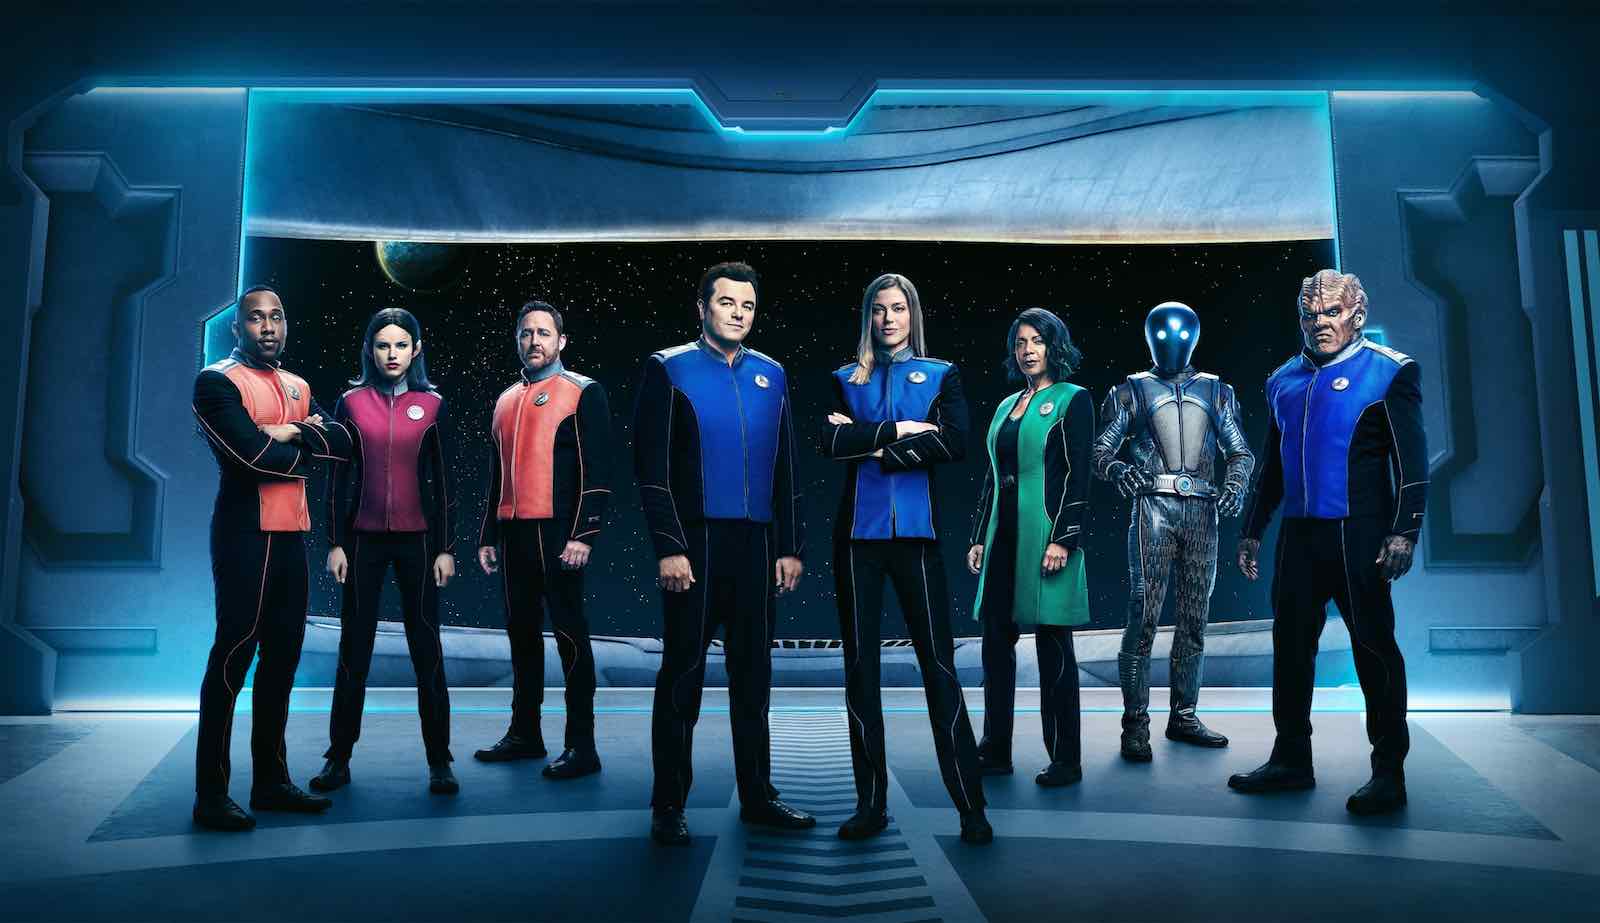 We thought 'The Orville' would be returning for S3 on Fox – but news at Comic-Con confirmed that Hulu will be officially streaming the space opera series.